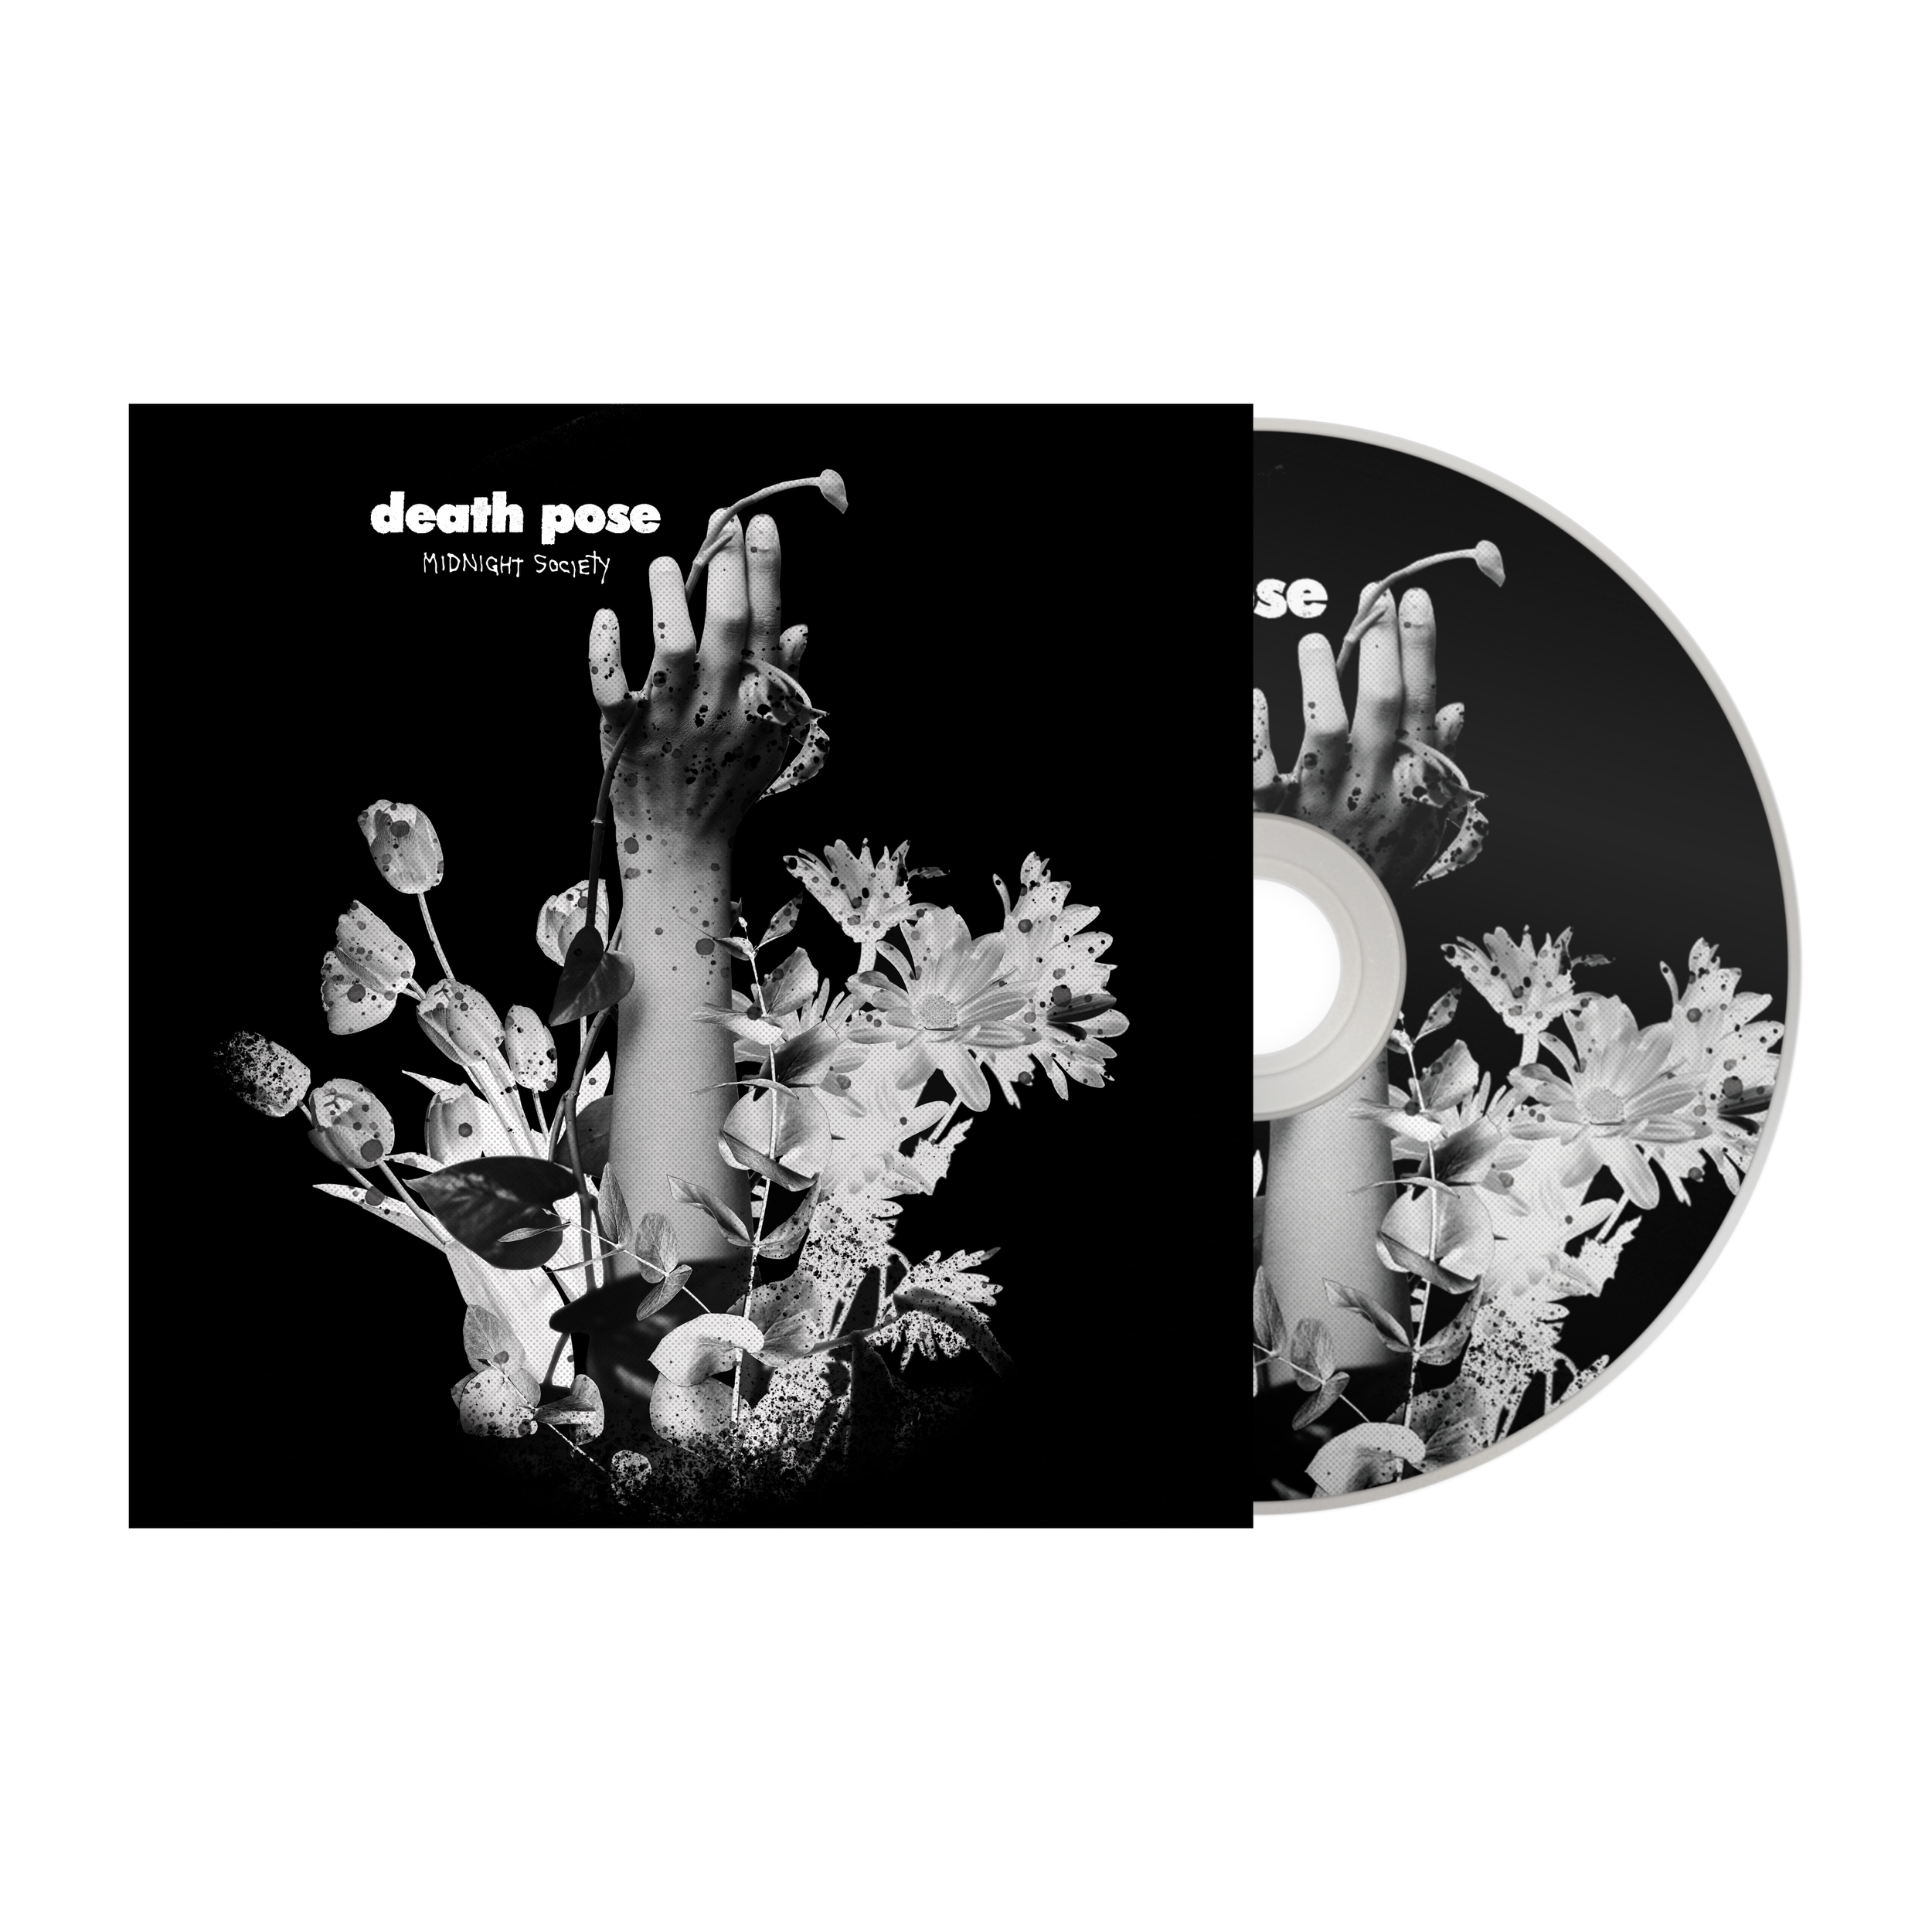 death pose - midnight society - cd.png